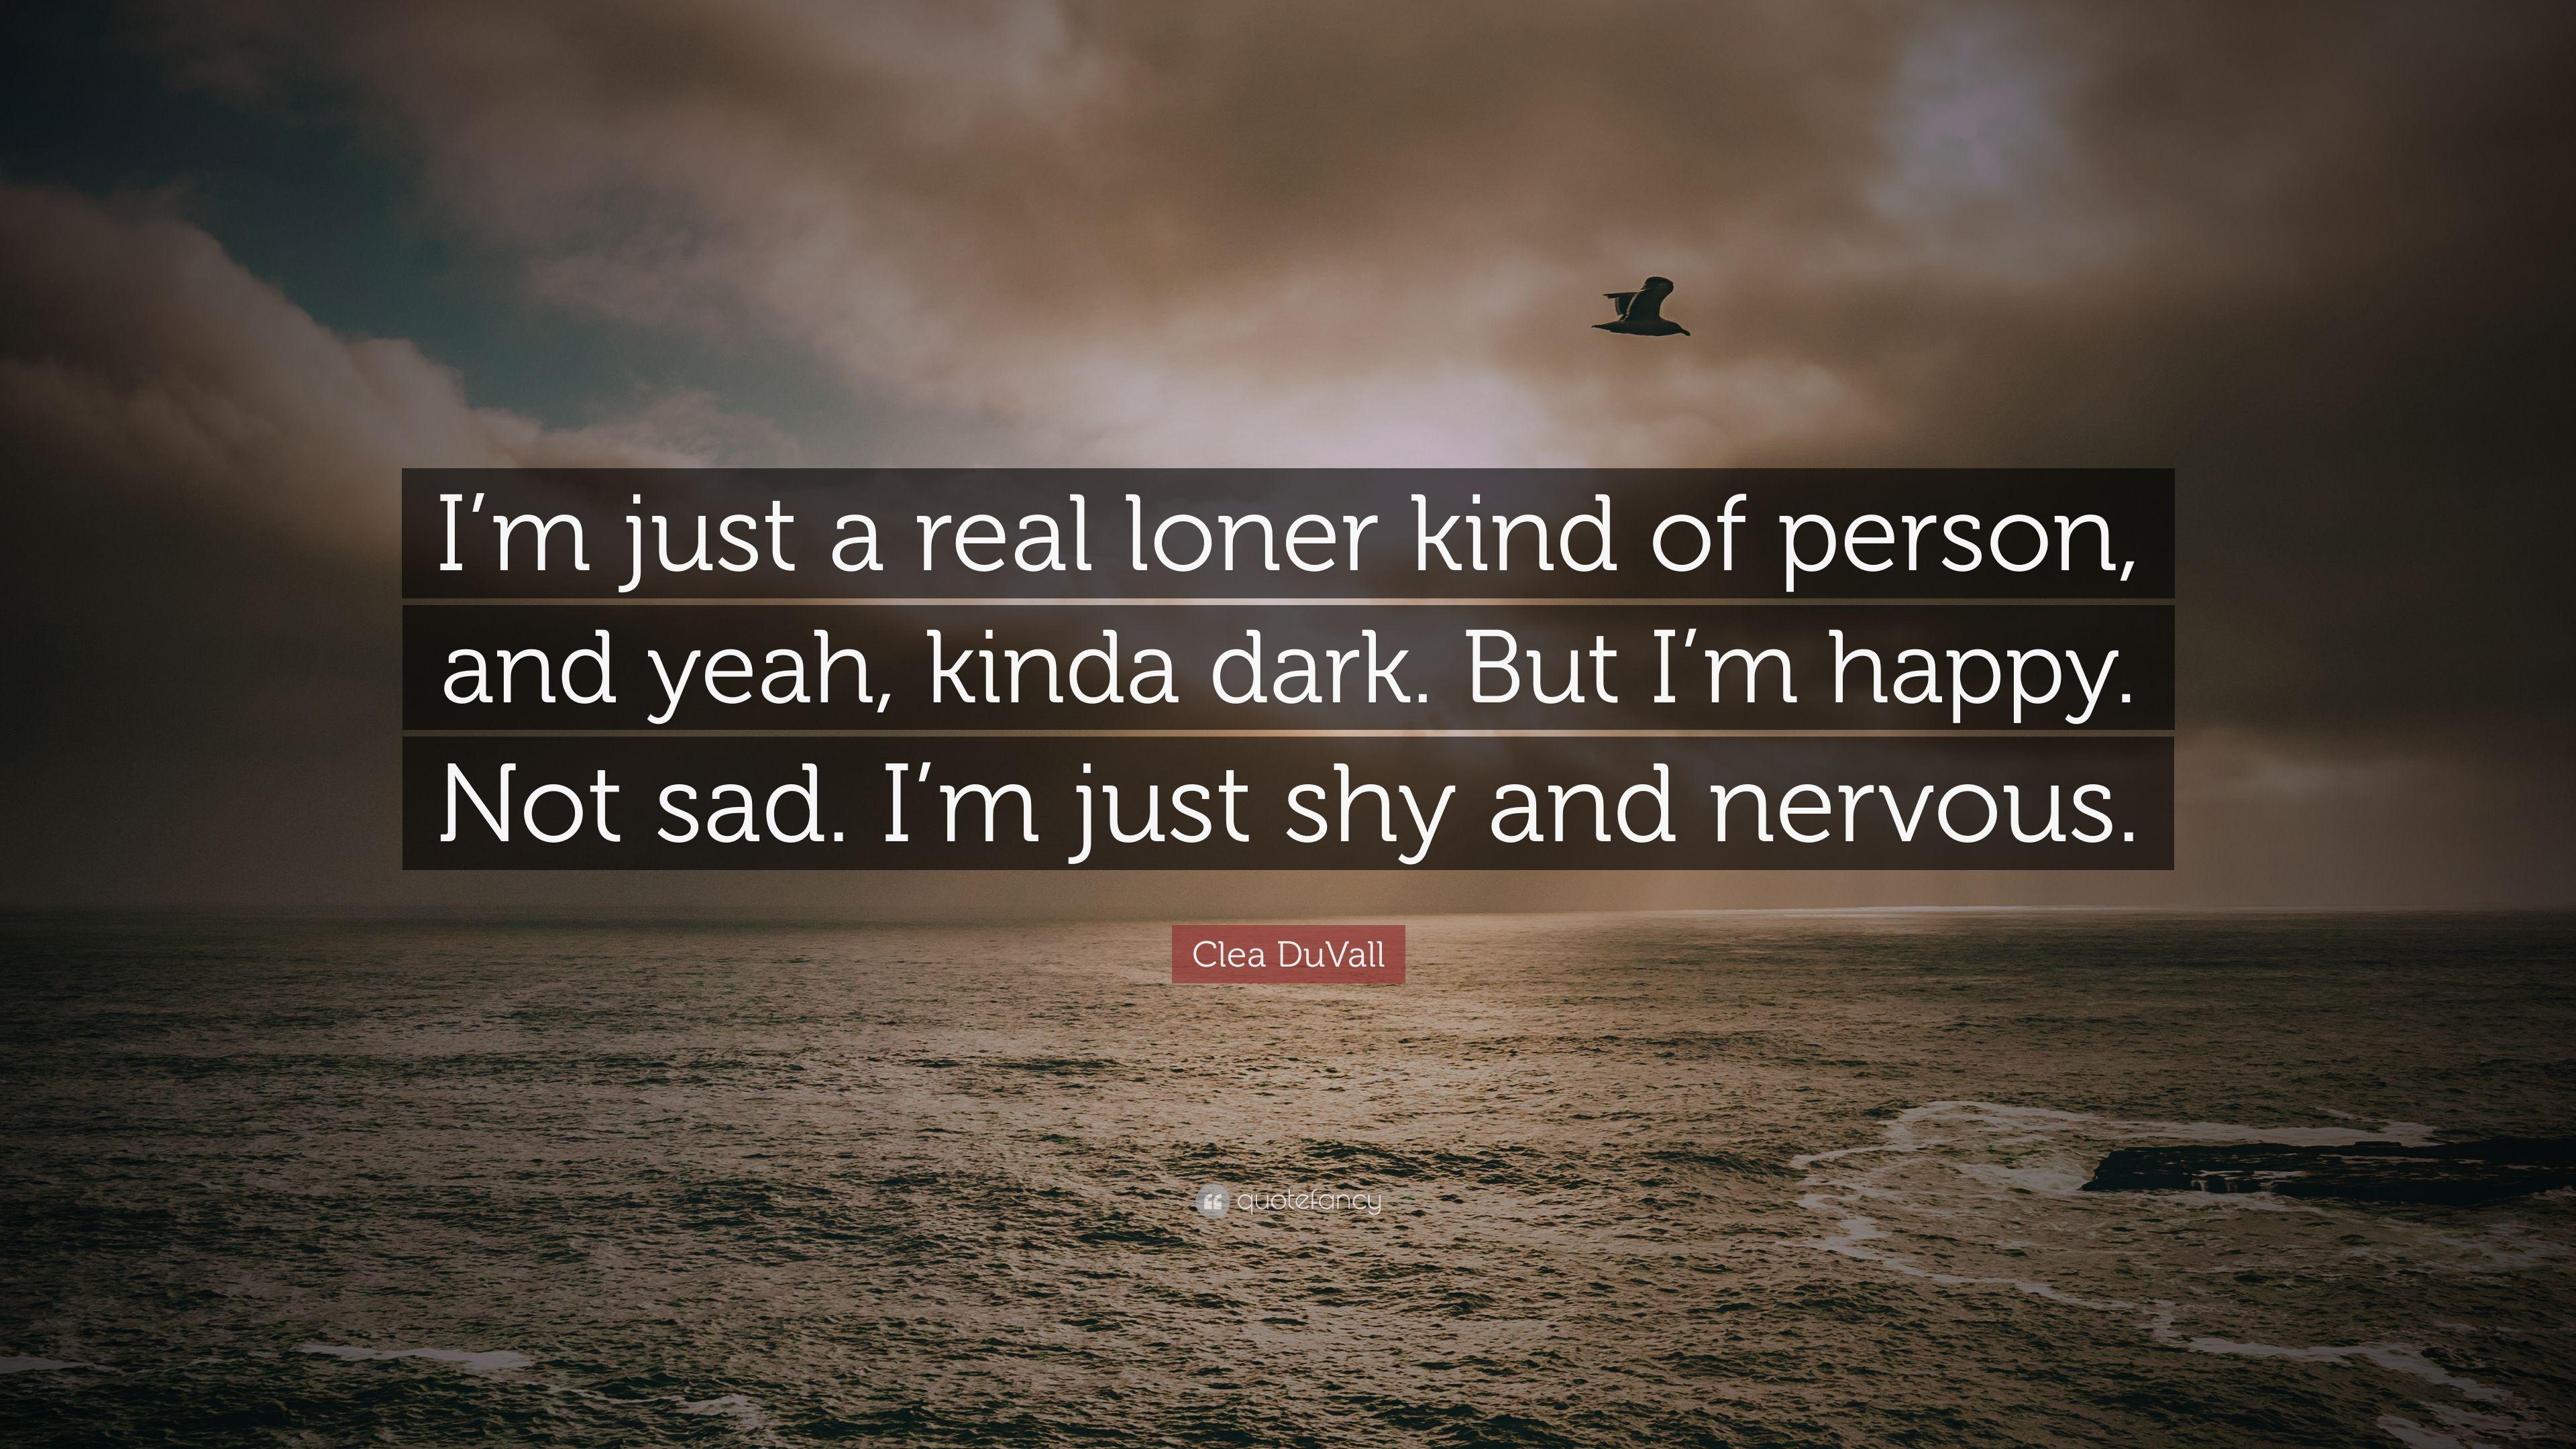 Clea DuVall Quote: “I'm just a real loner kind of person, and yeah